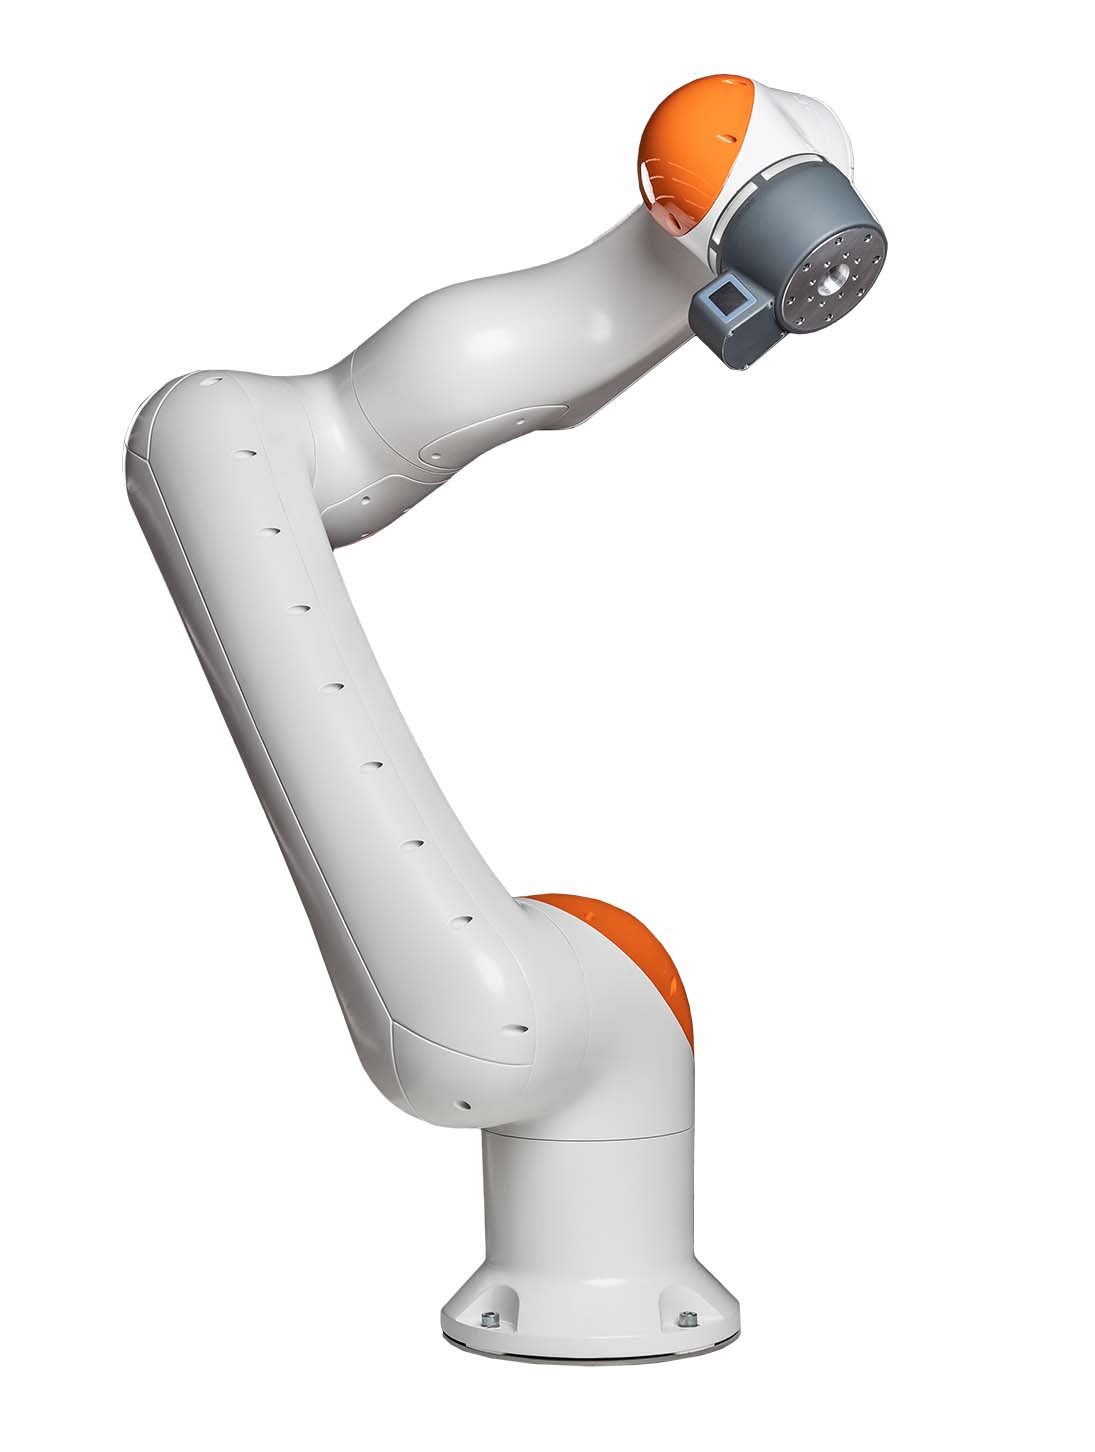 Robatech adhesive application systems can be connected to a Kuka LBR iisy 6 cobot via the integration kit.